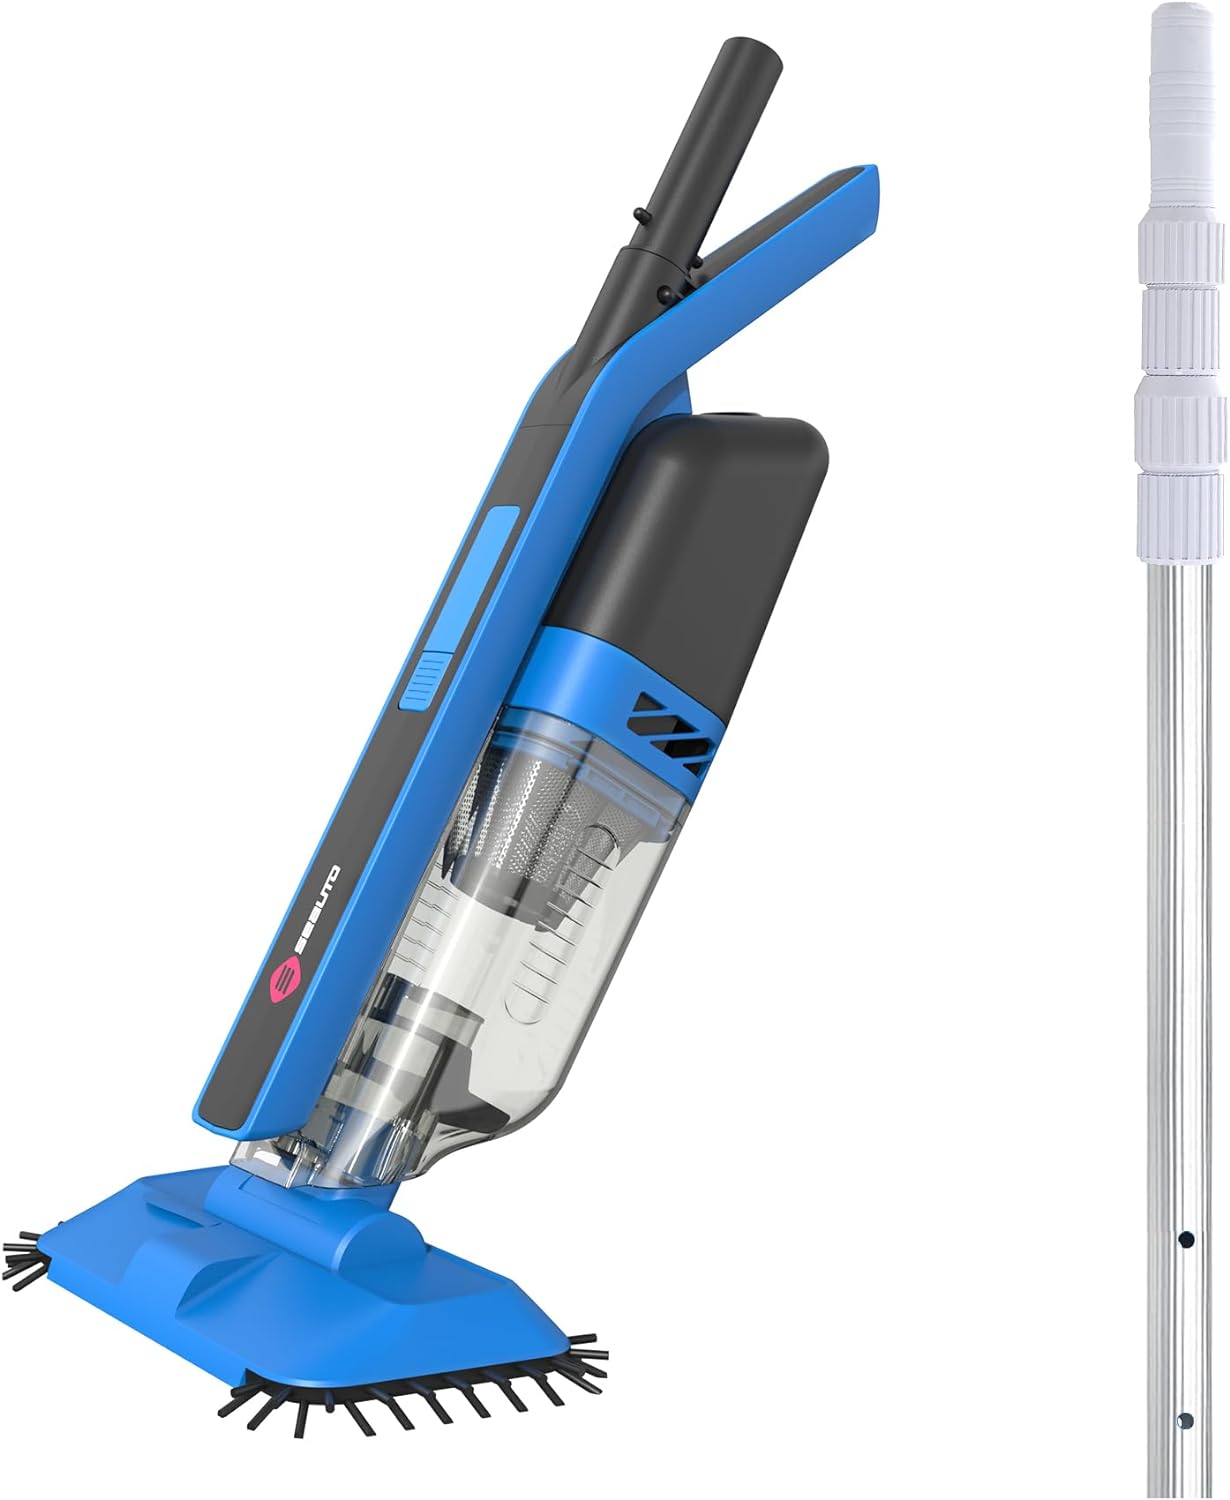 Seauto Cordless Pool Vacuum with Telescopic Pole, Handheld Rechargeable Pool Cleaner for Deep Cleaning with 60 Mins Runtime, Powerful Suction, Ideal for Pools, Spas and Hot Tub (Blue) (Blue)